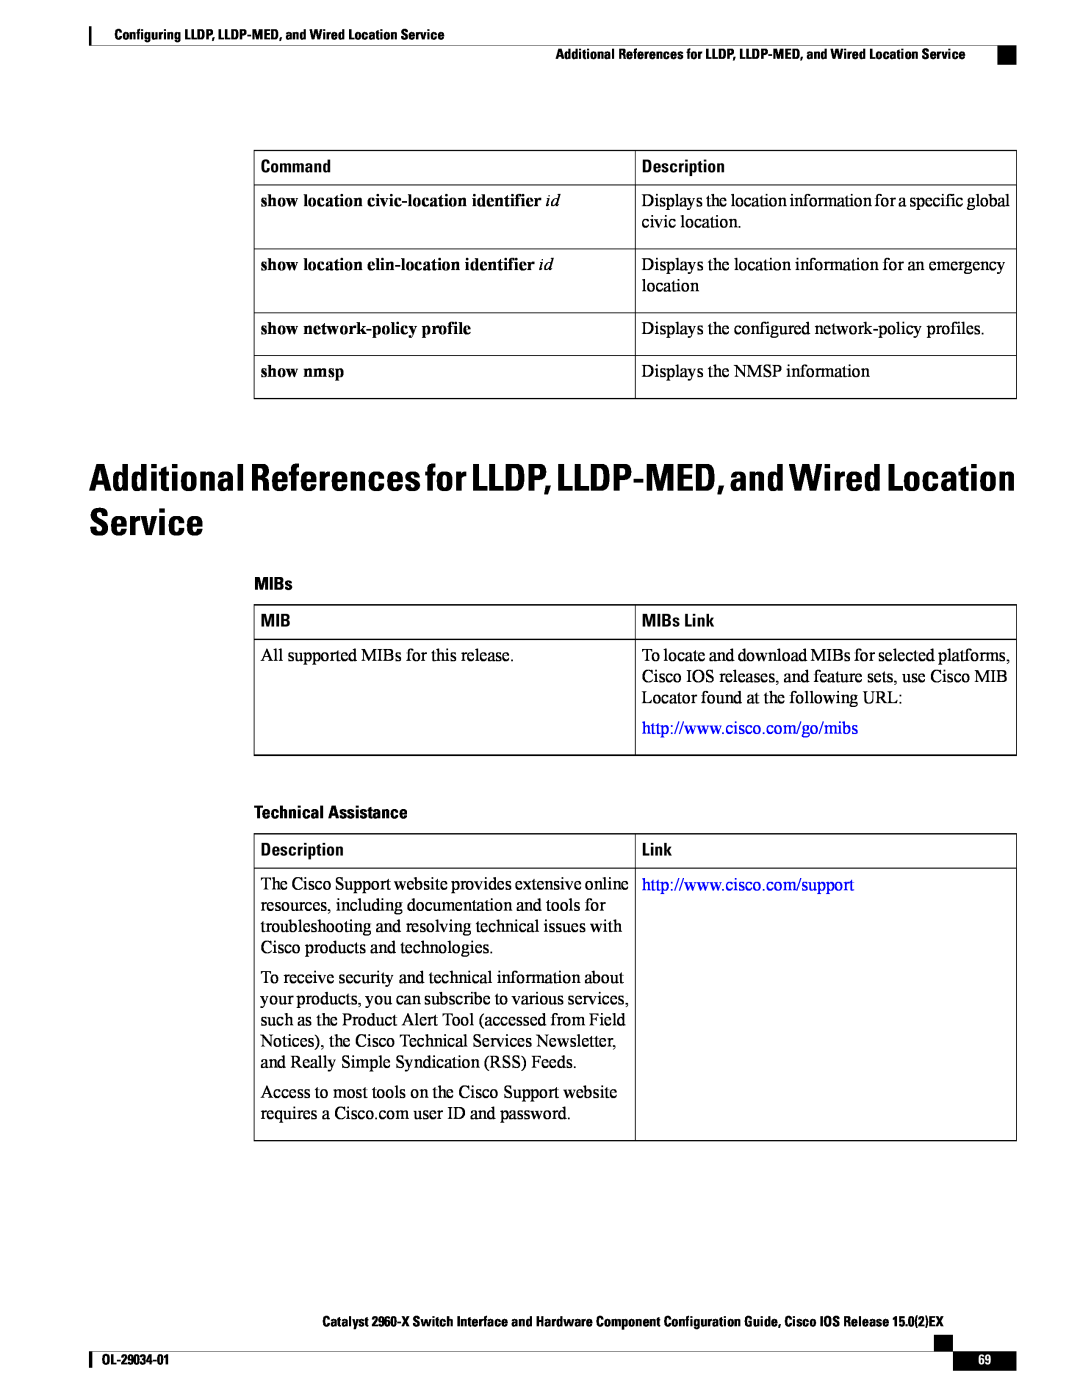 Cisco Systems WSC2960X48TDL Additional References for LLDP, LLDP-MED, and Wired Location Service, civic location, Command 